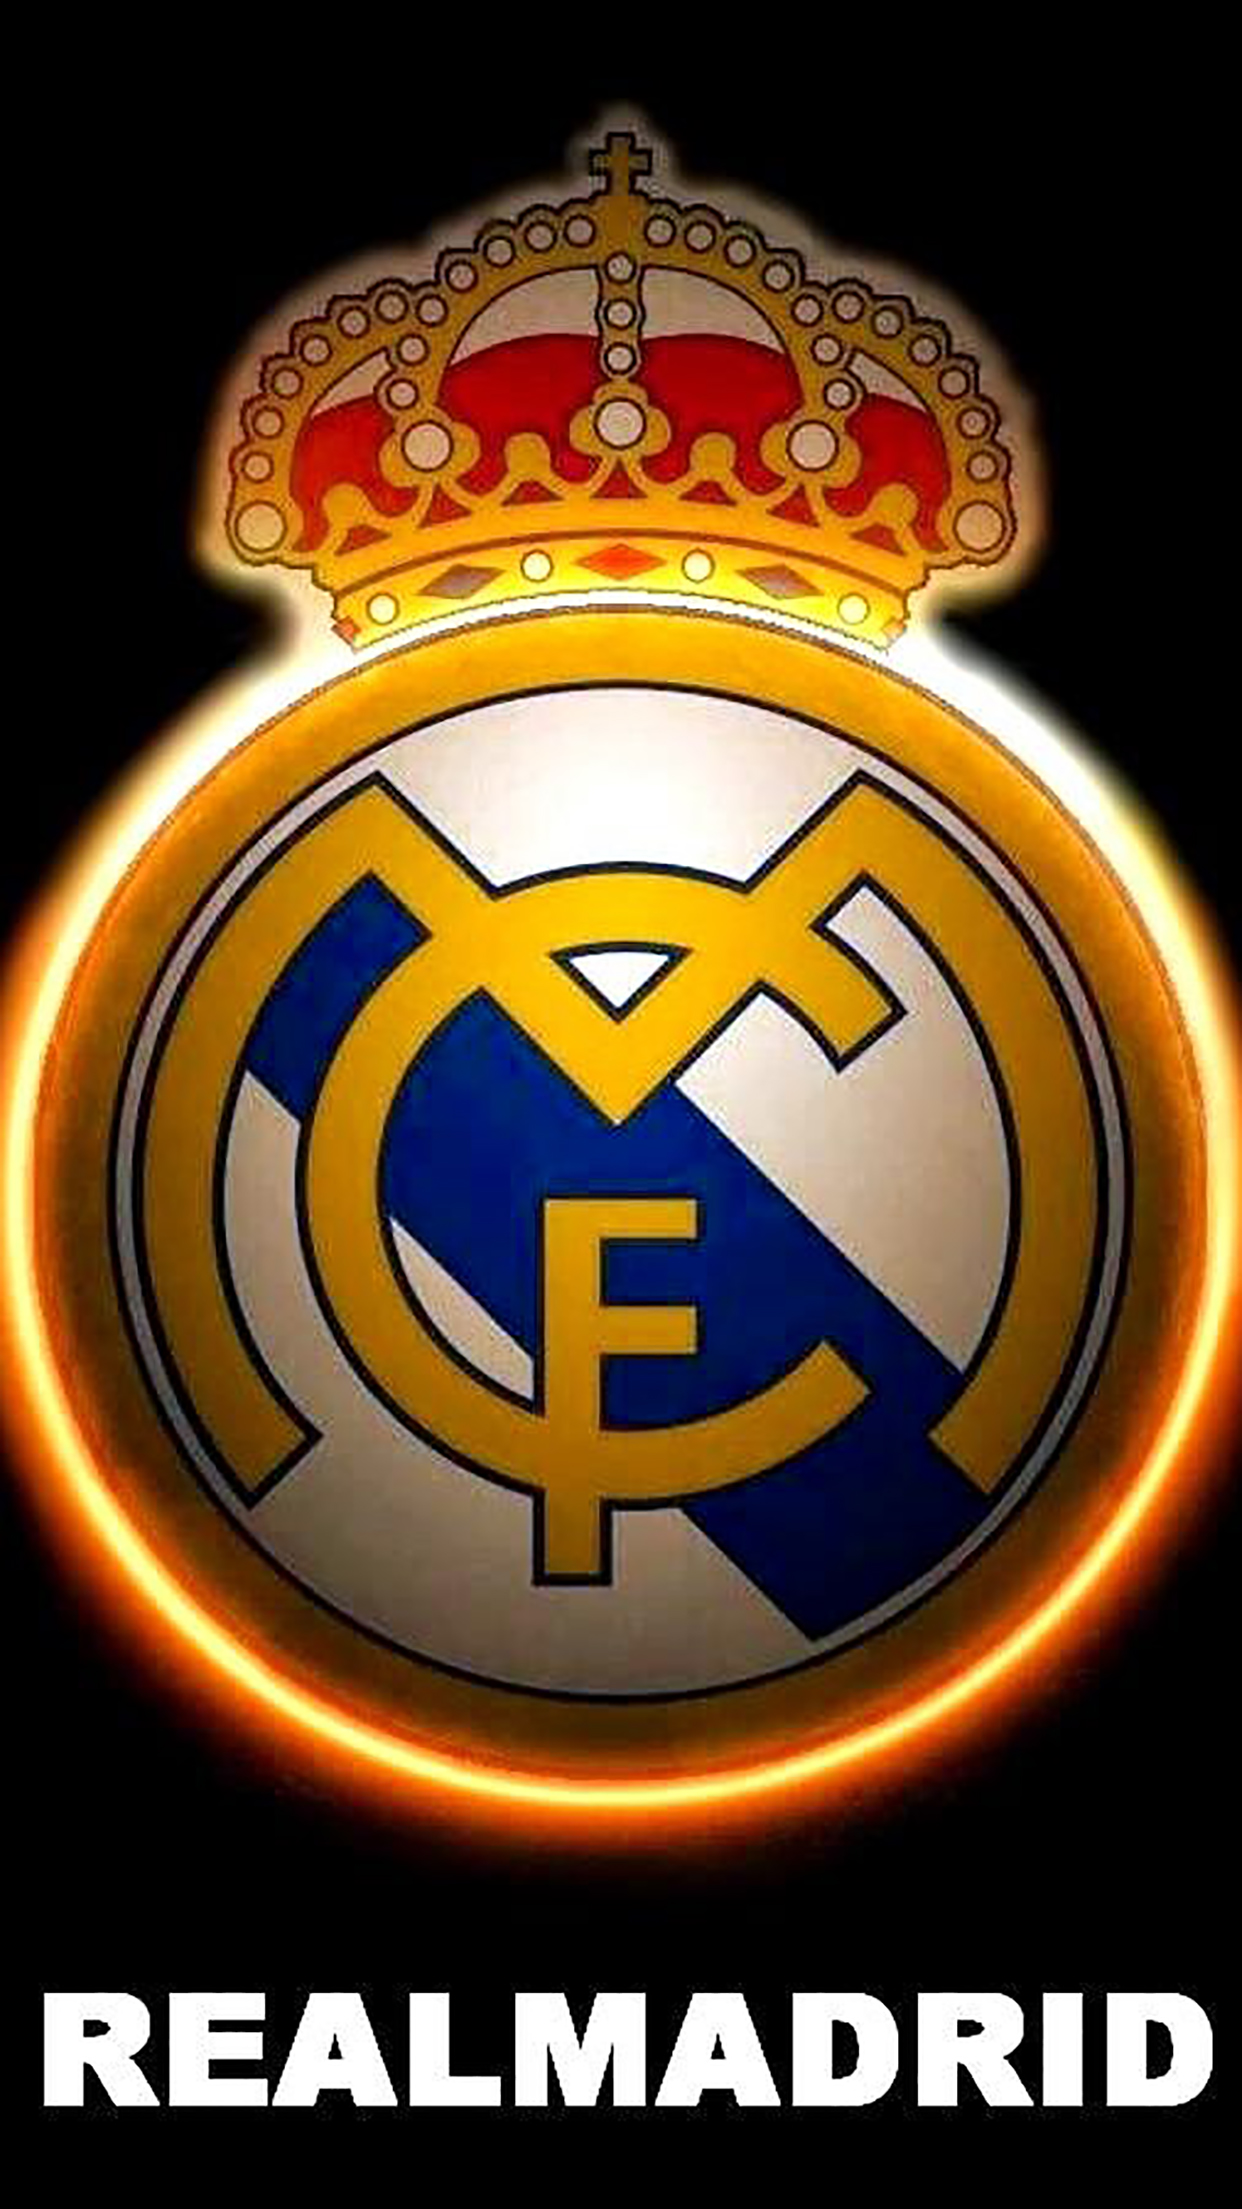 Real madrid logo wallpaper for iphone pro max x